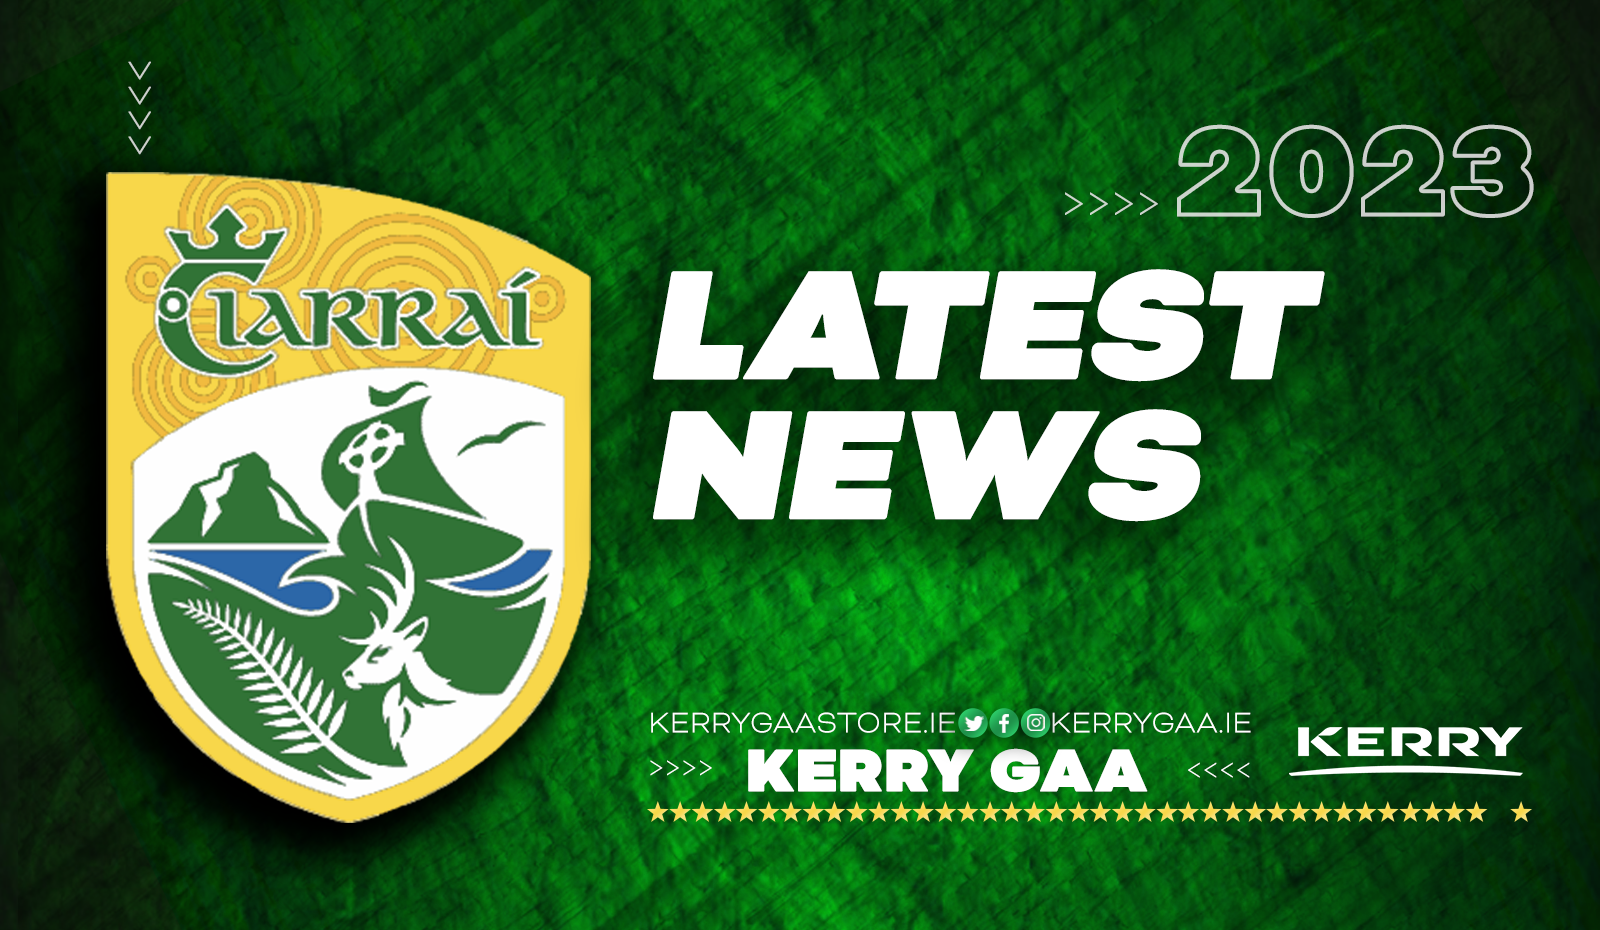 Garvey’s SuperValu – Kerry County Championship Team of the 21st Century